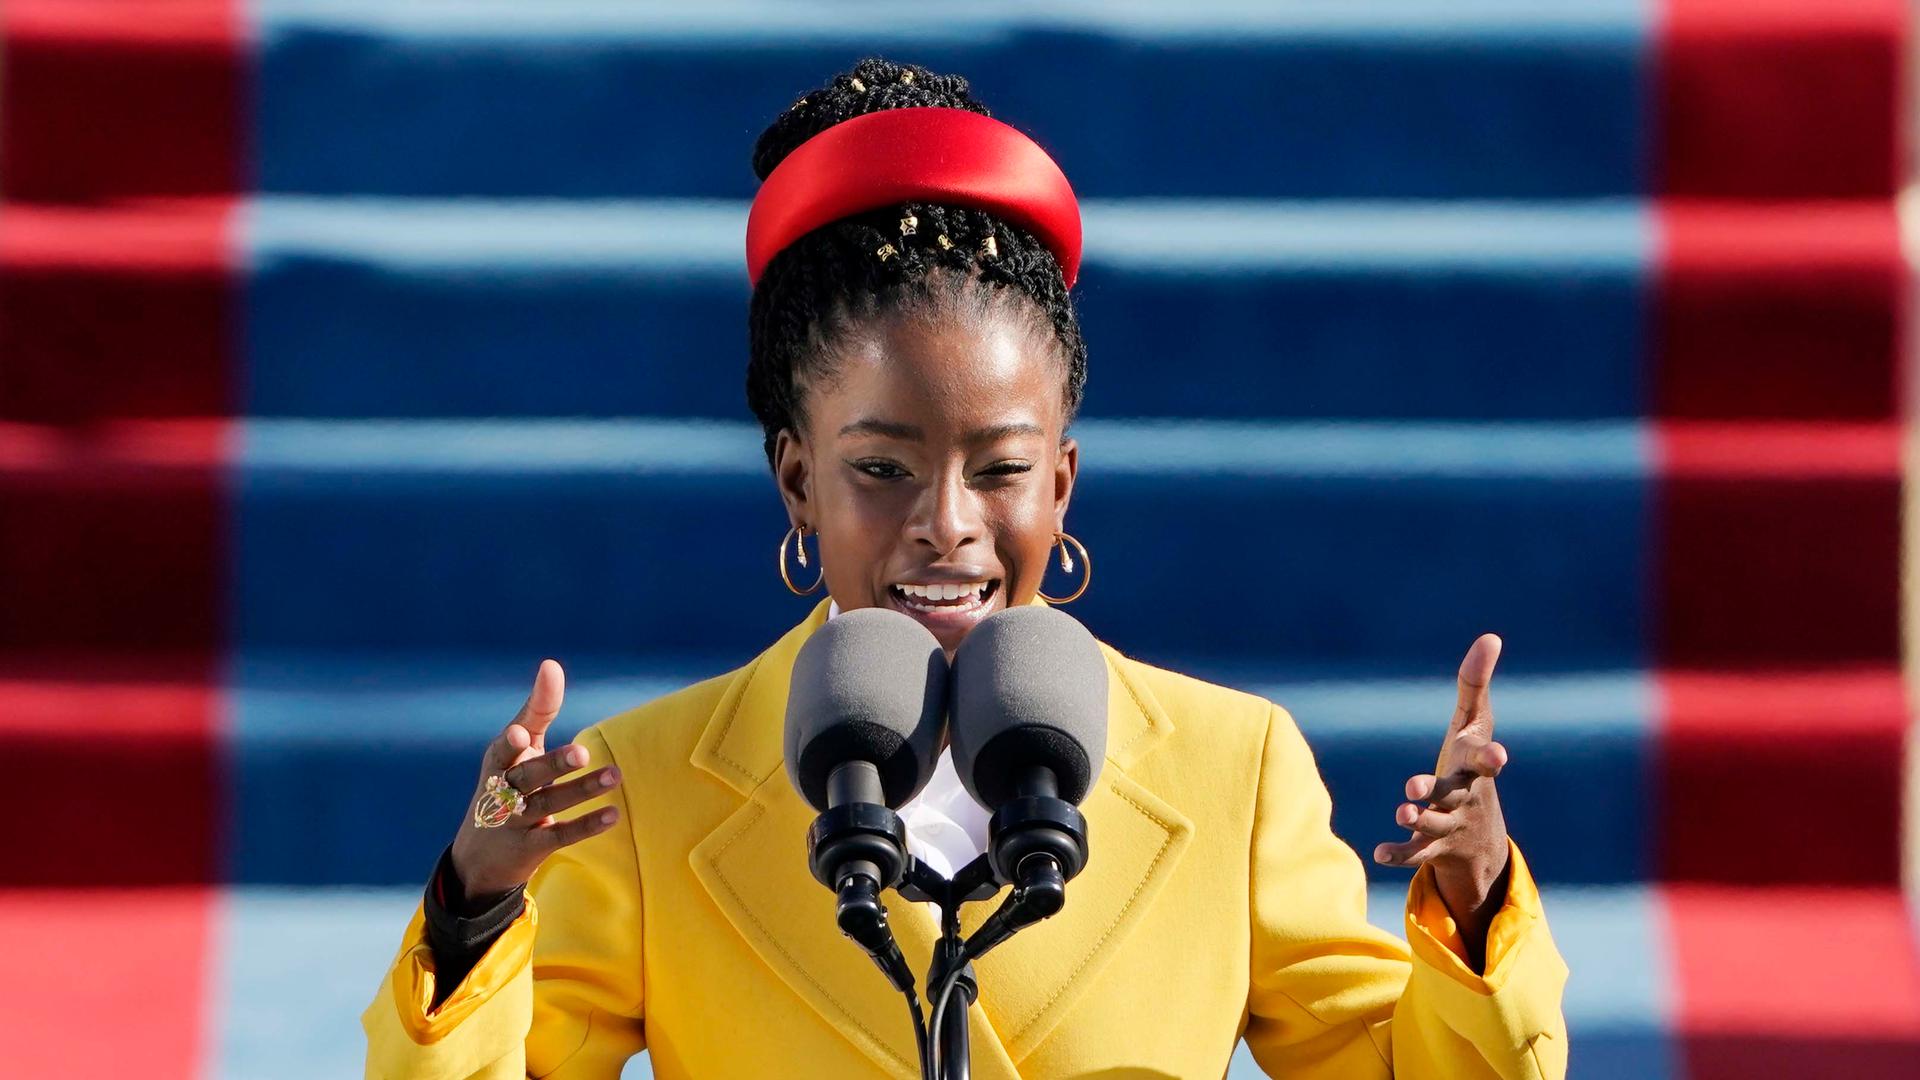 American poet Amanda Gorman reads a poem during the 59th Presidential Inauguration at the US Capitol in Washington, Jan. 20, 2021.